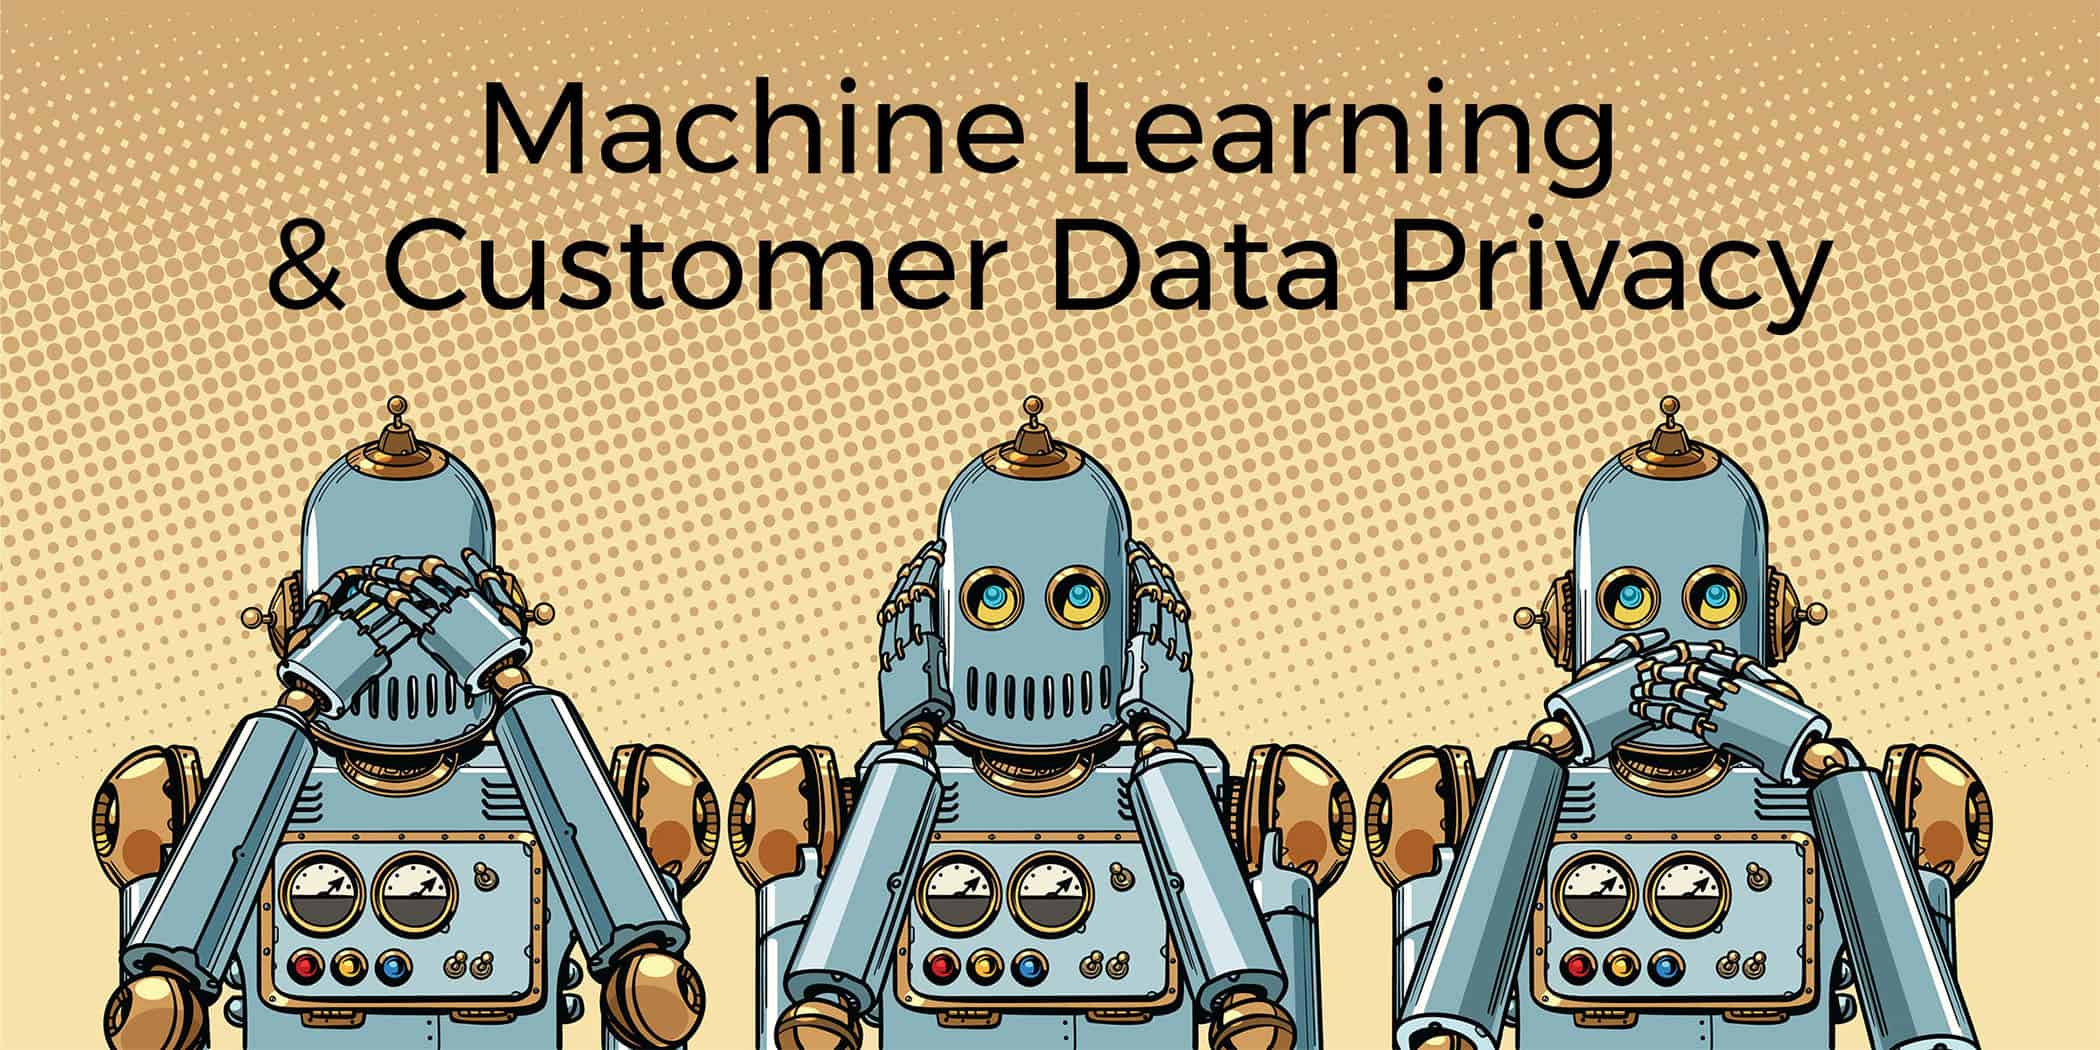 Machine learning robots and data privacy